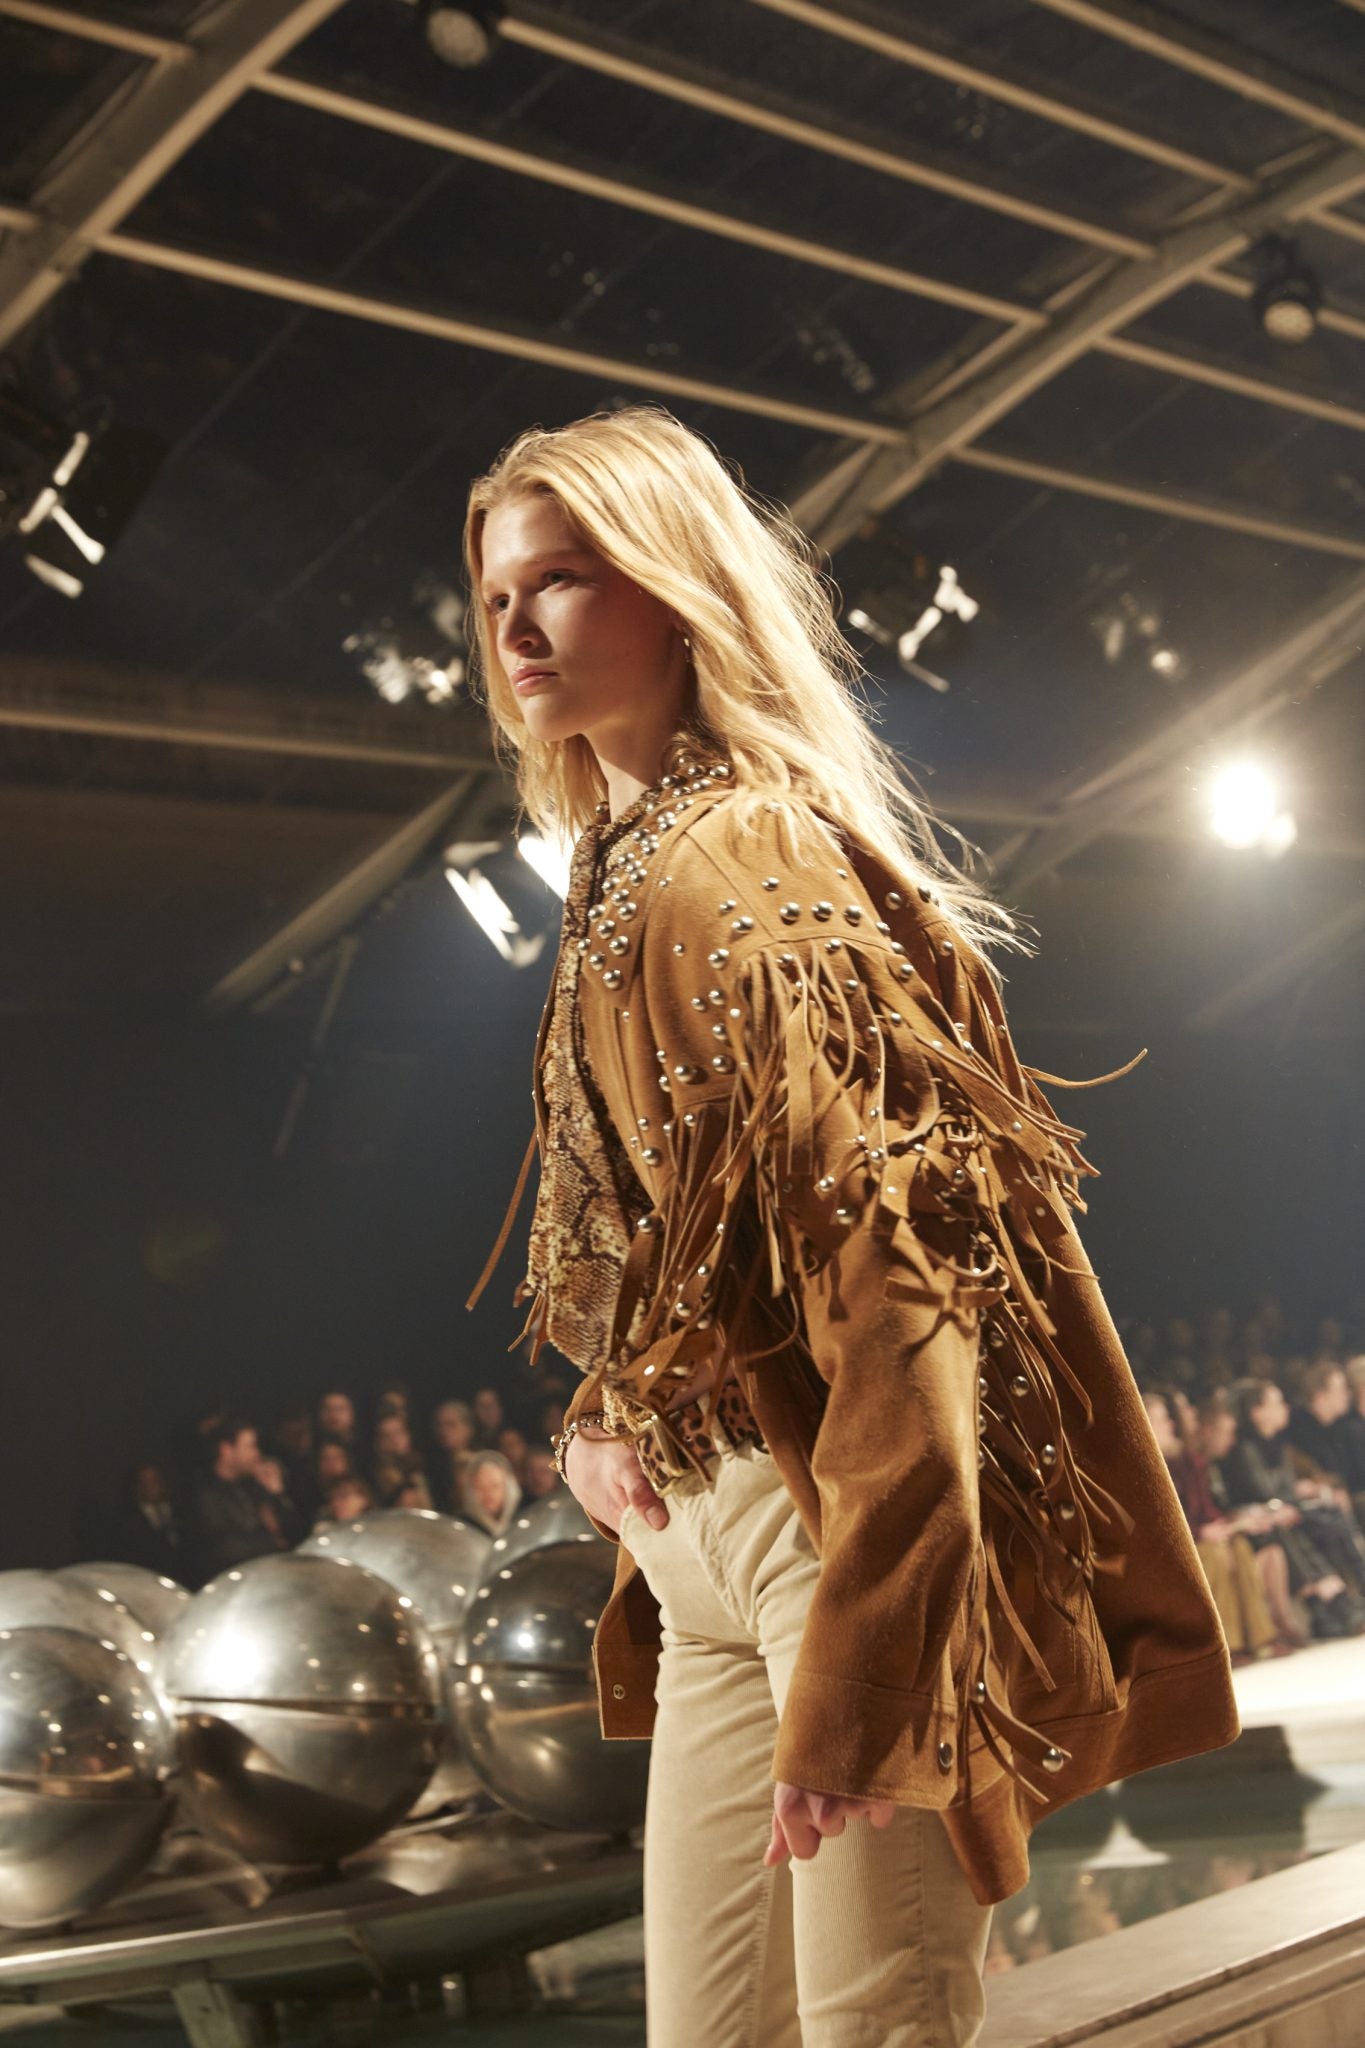 Cropped image of female model on catwalk wearing a tan suede fringed jacket with metallic bead details, a leopard-print belt and cream-colored jeans.